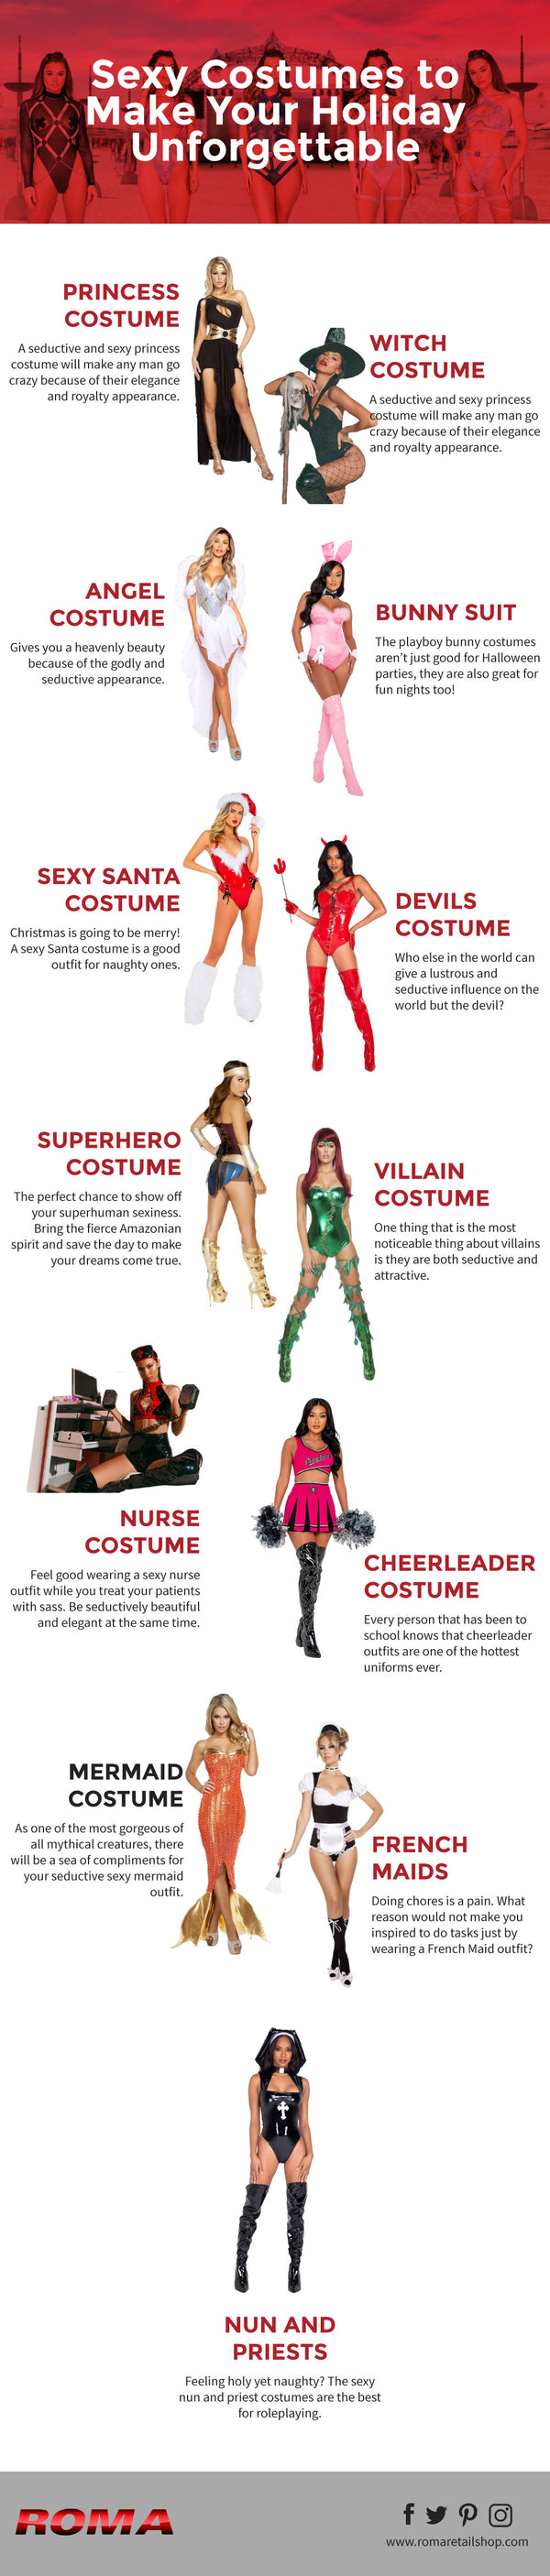 Sexy Costumes to Make Your Holiday Unforgettable